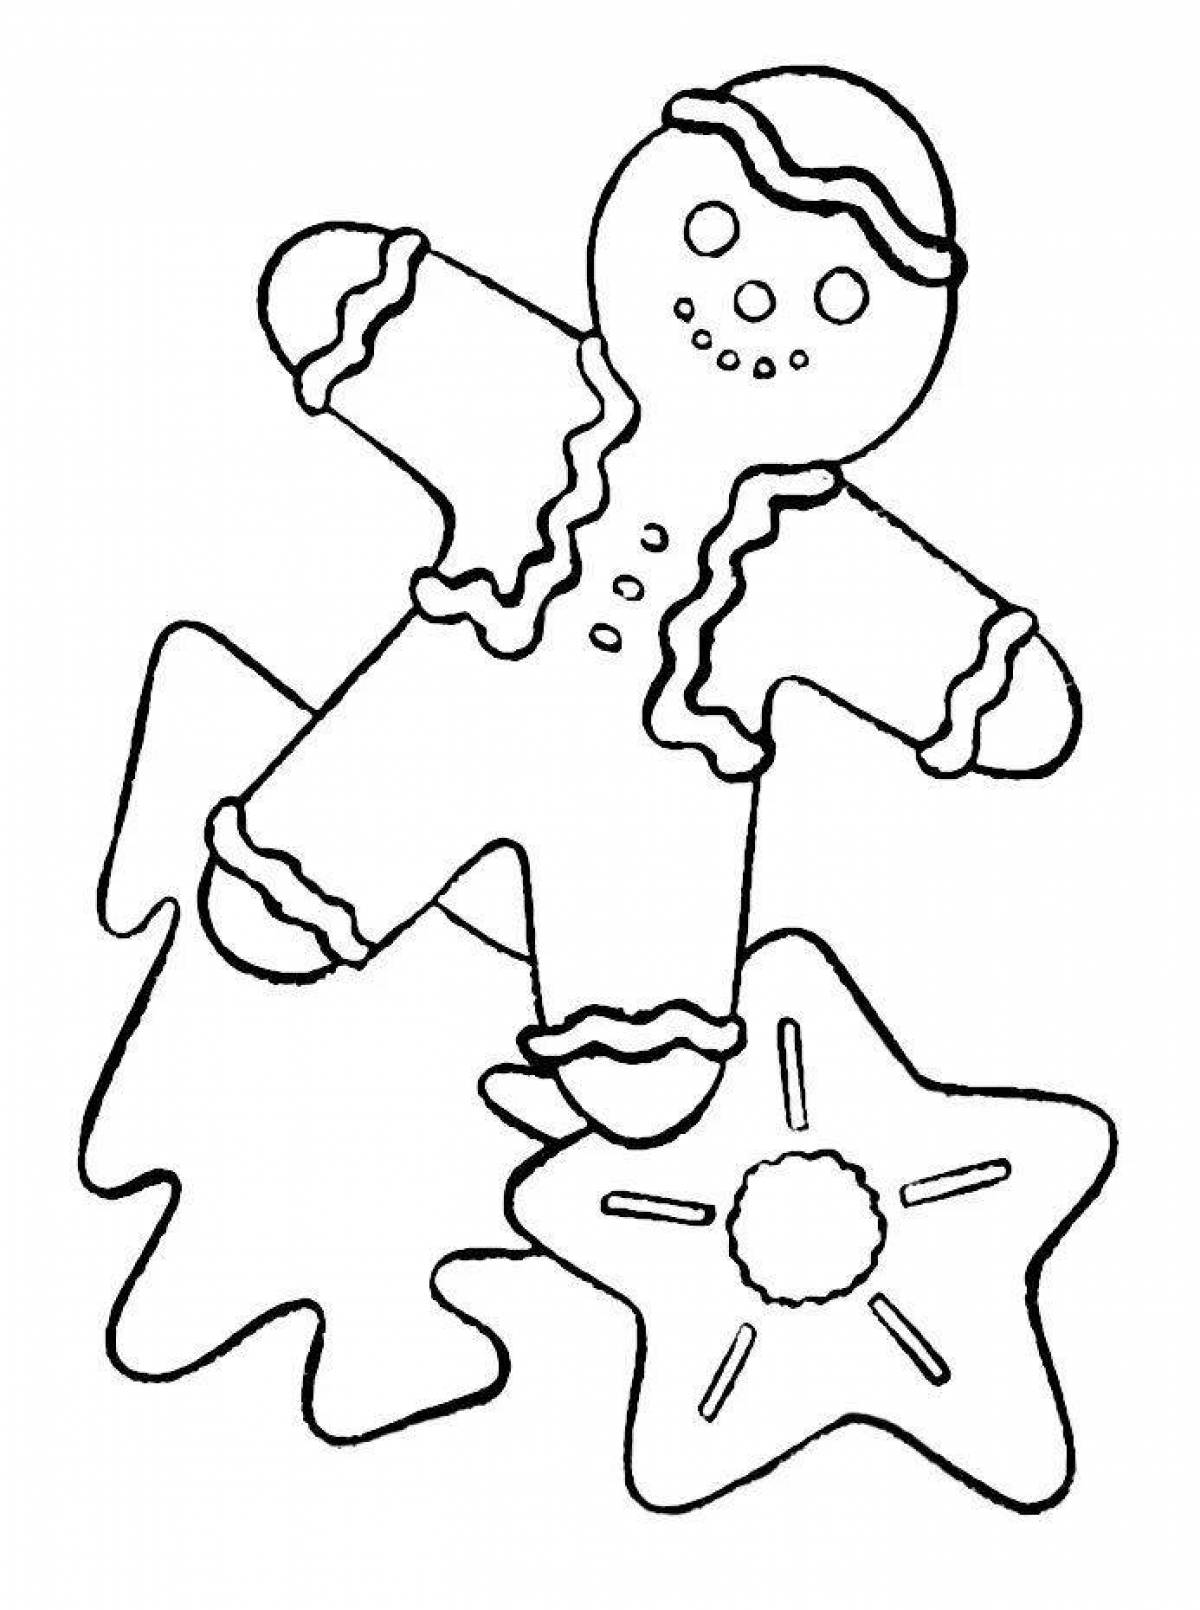 Merry Christmas Gingerbread Coloring Page